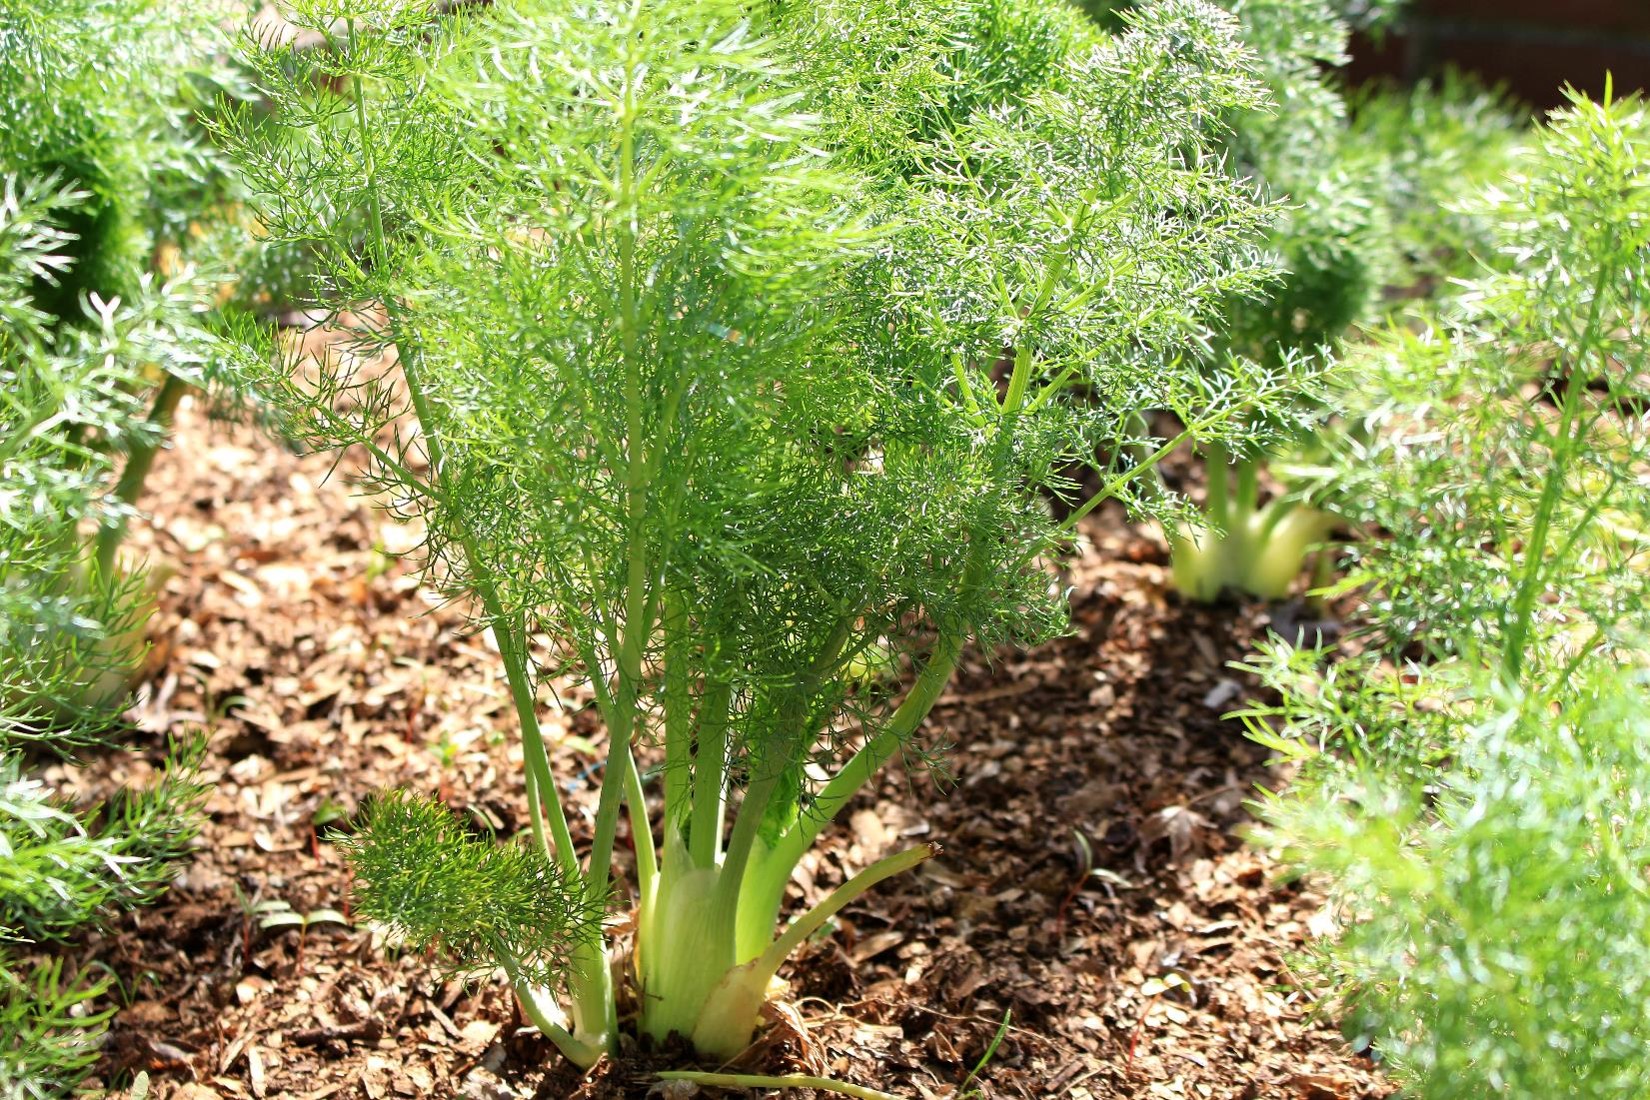 FIND OUT MORE ABOUT FENNEL